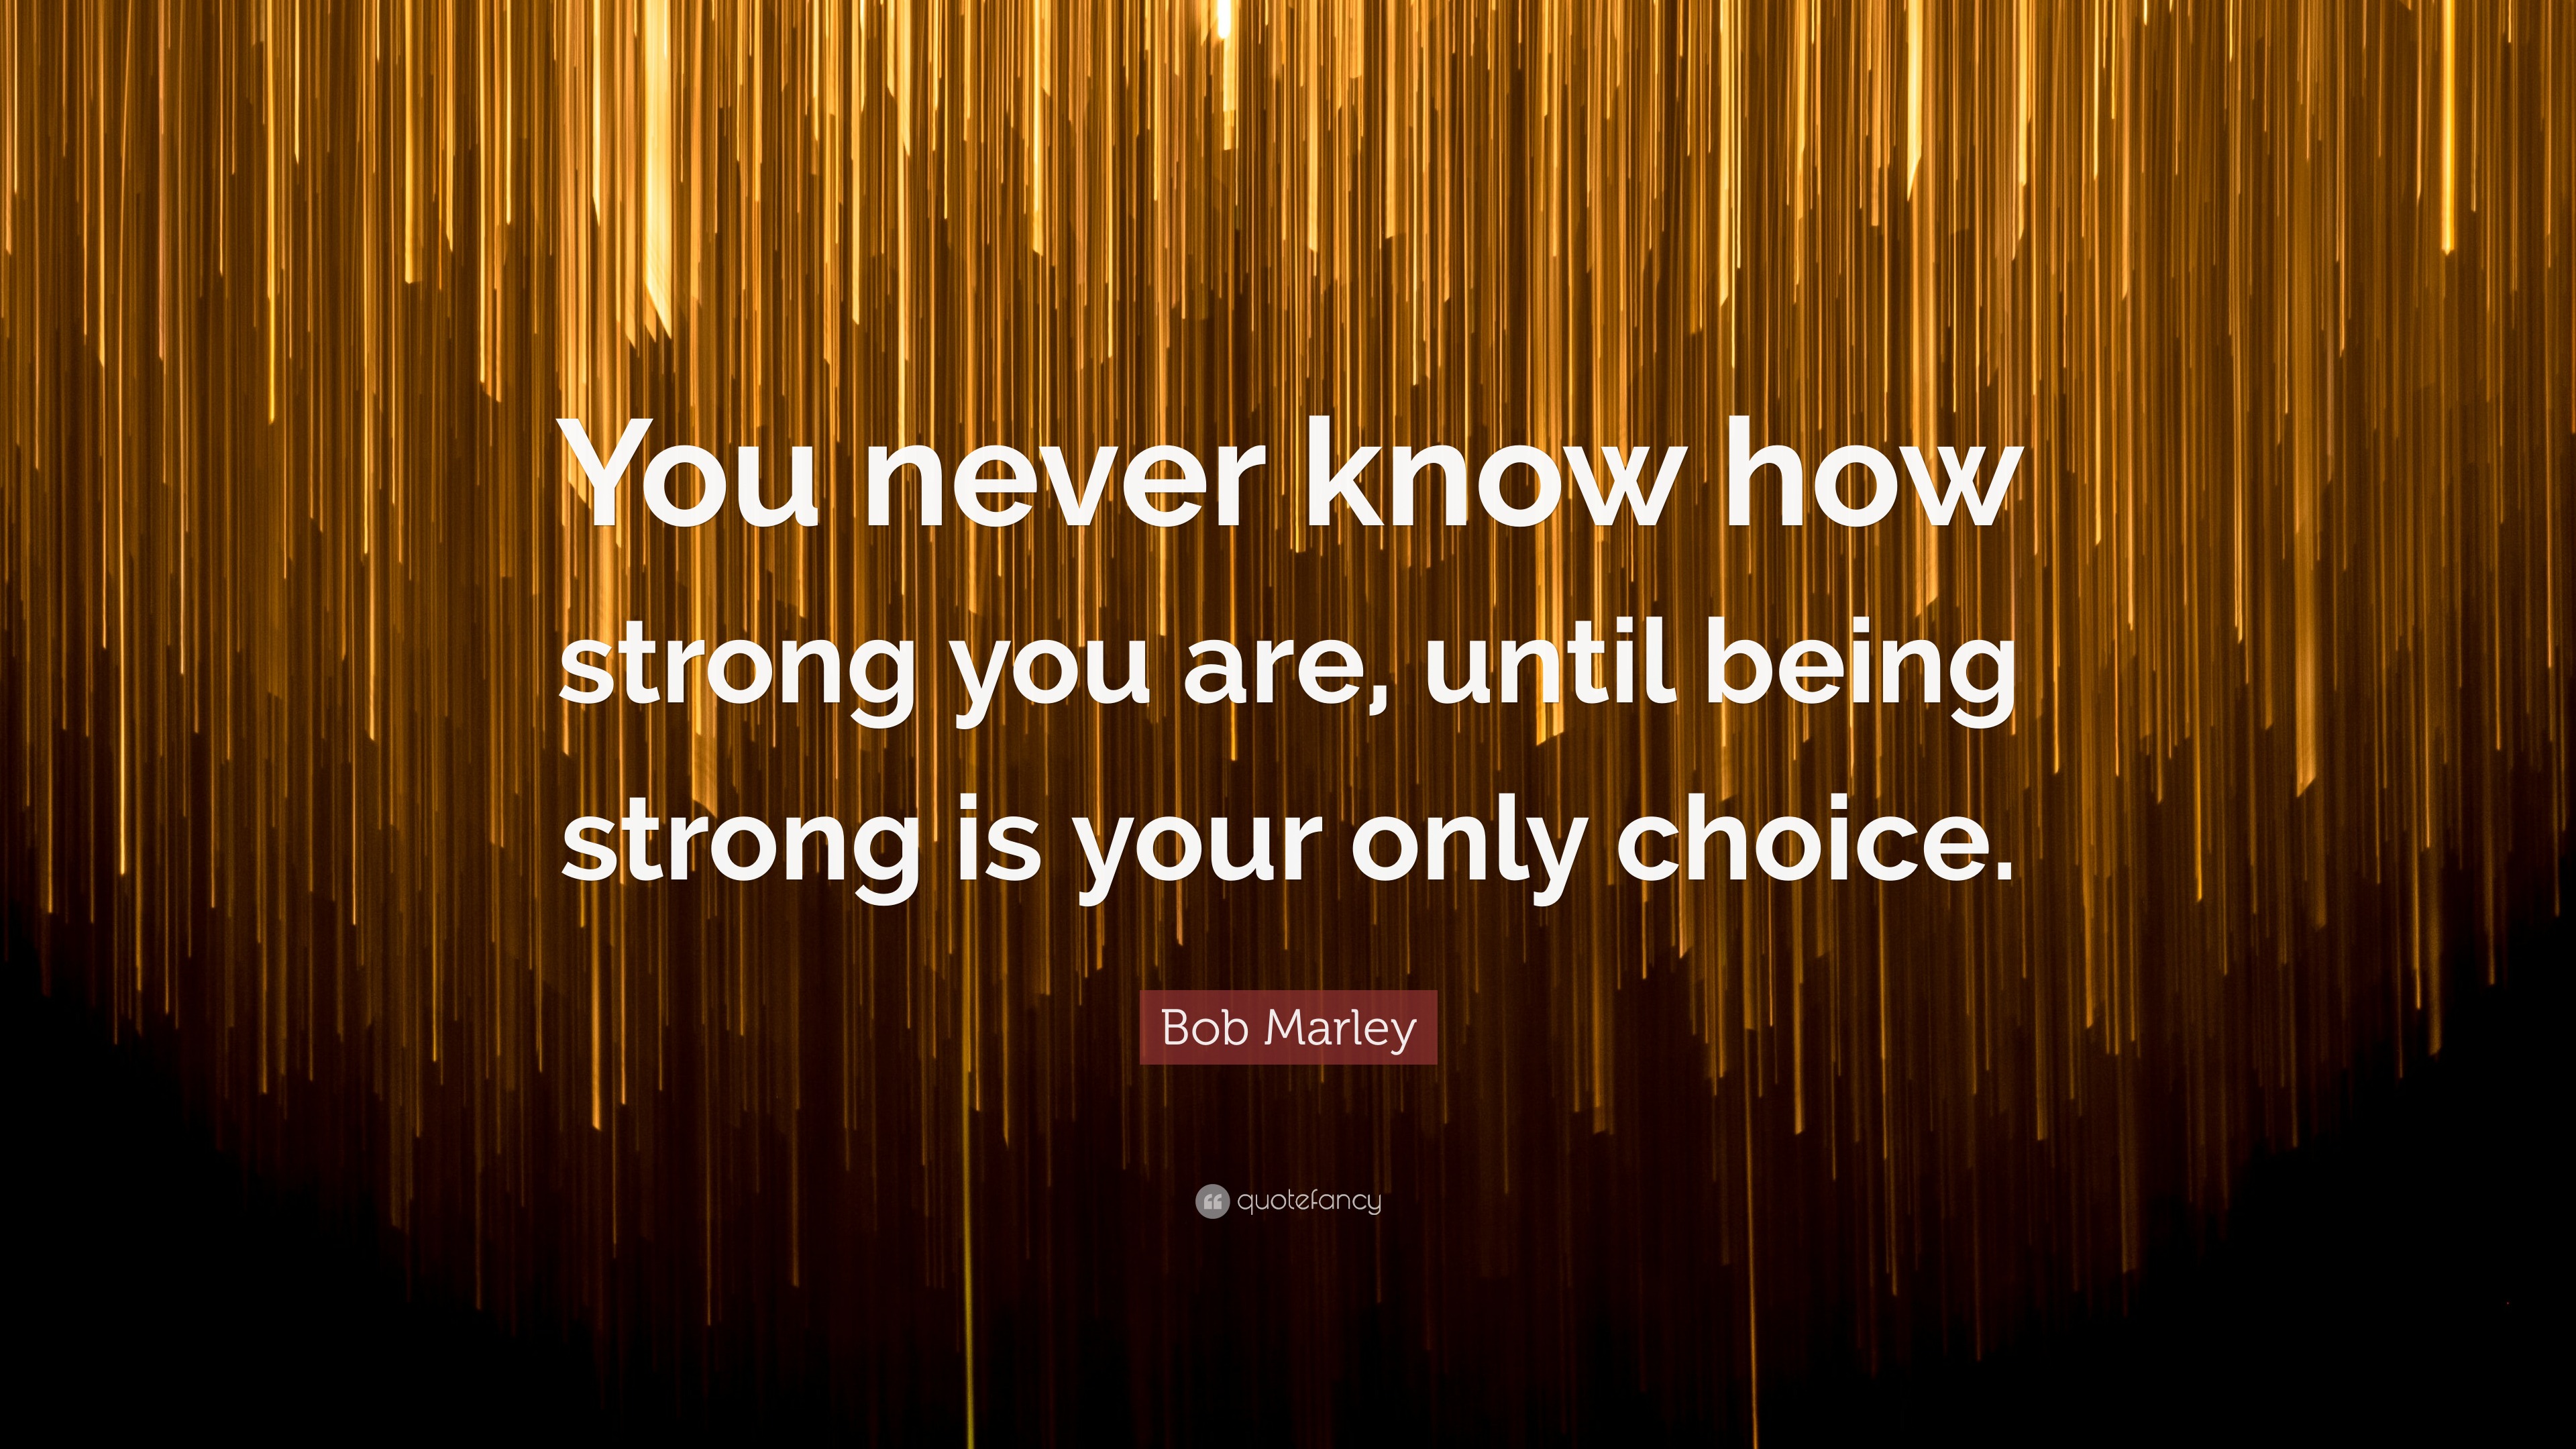 Are You Strong?